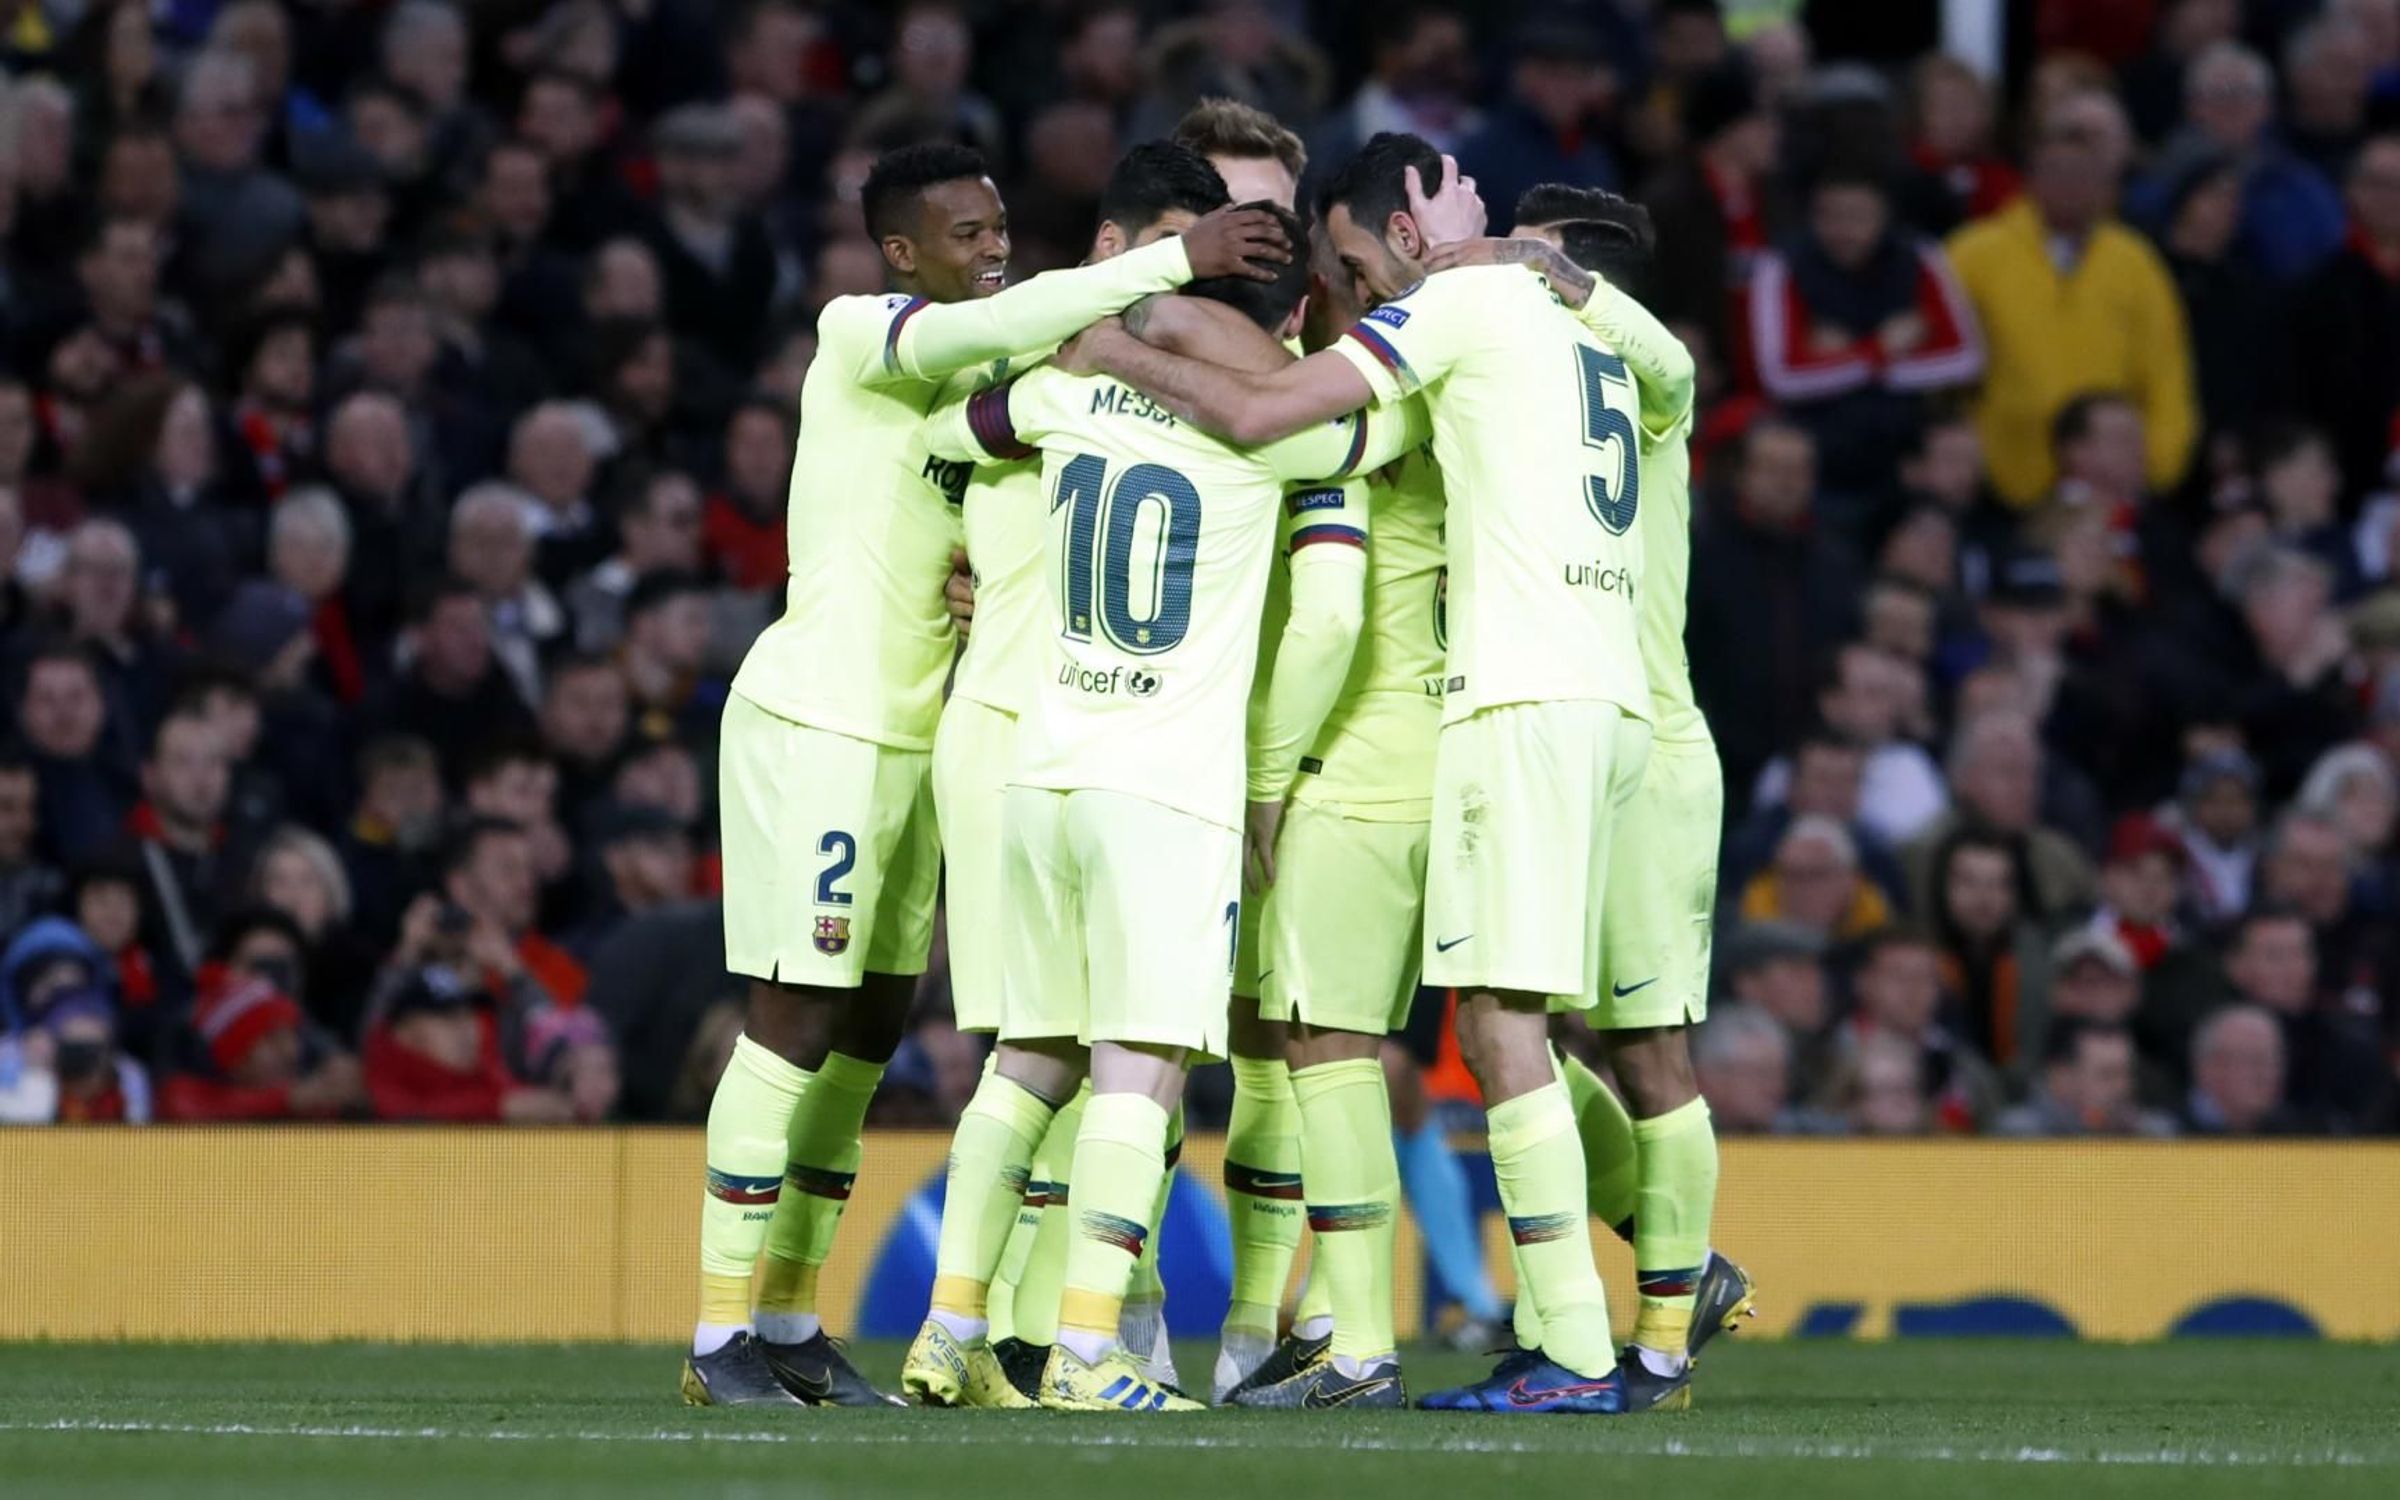 Some Barça members embrace to celebrate their victory on April 10 2019 (courtesy of FCBarcelona)